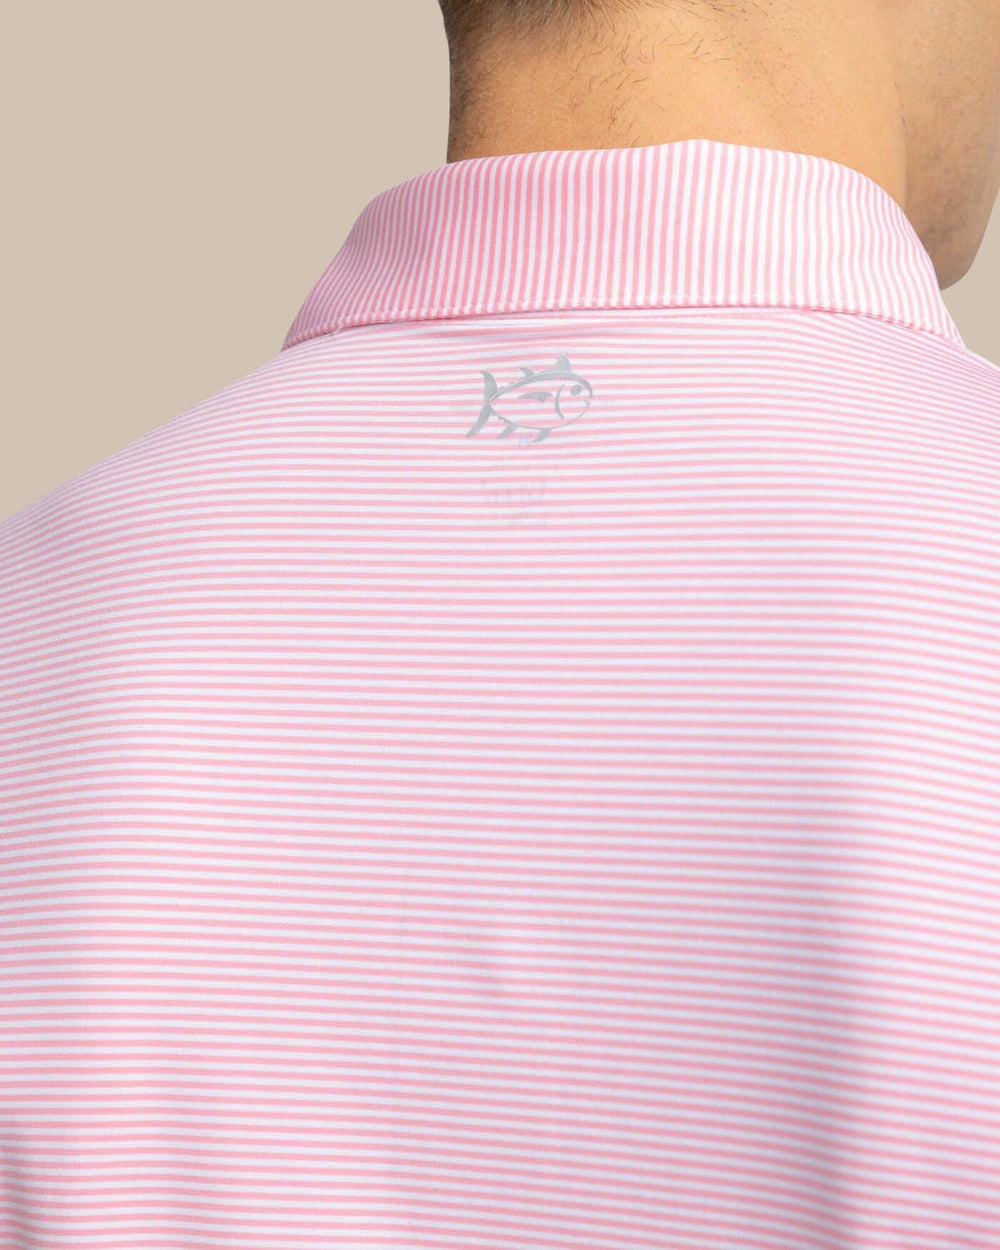 The detail view of the Southern Tide brrr-eeze Meadowbrook Stripe Polo by Southern Tide - Geranium Pink